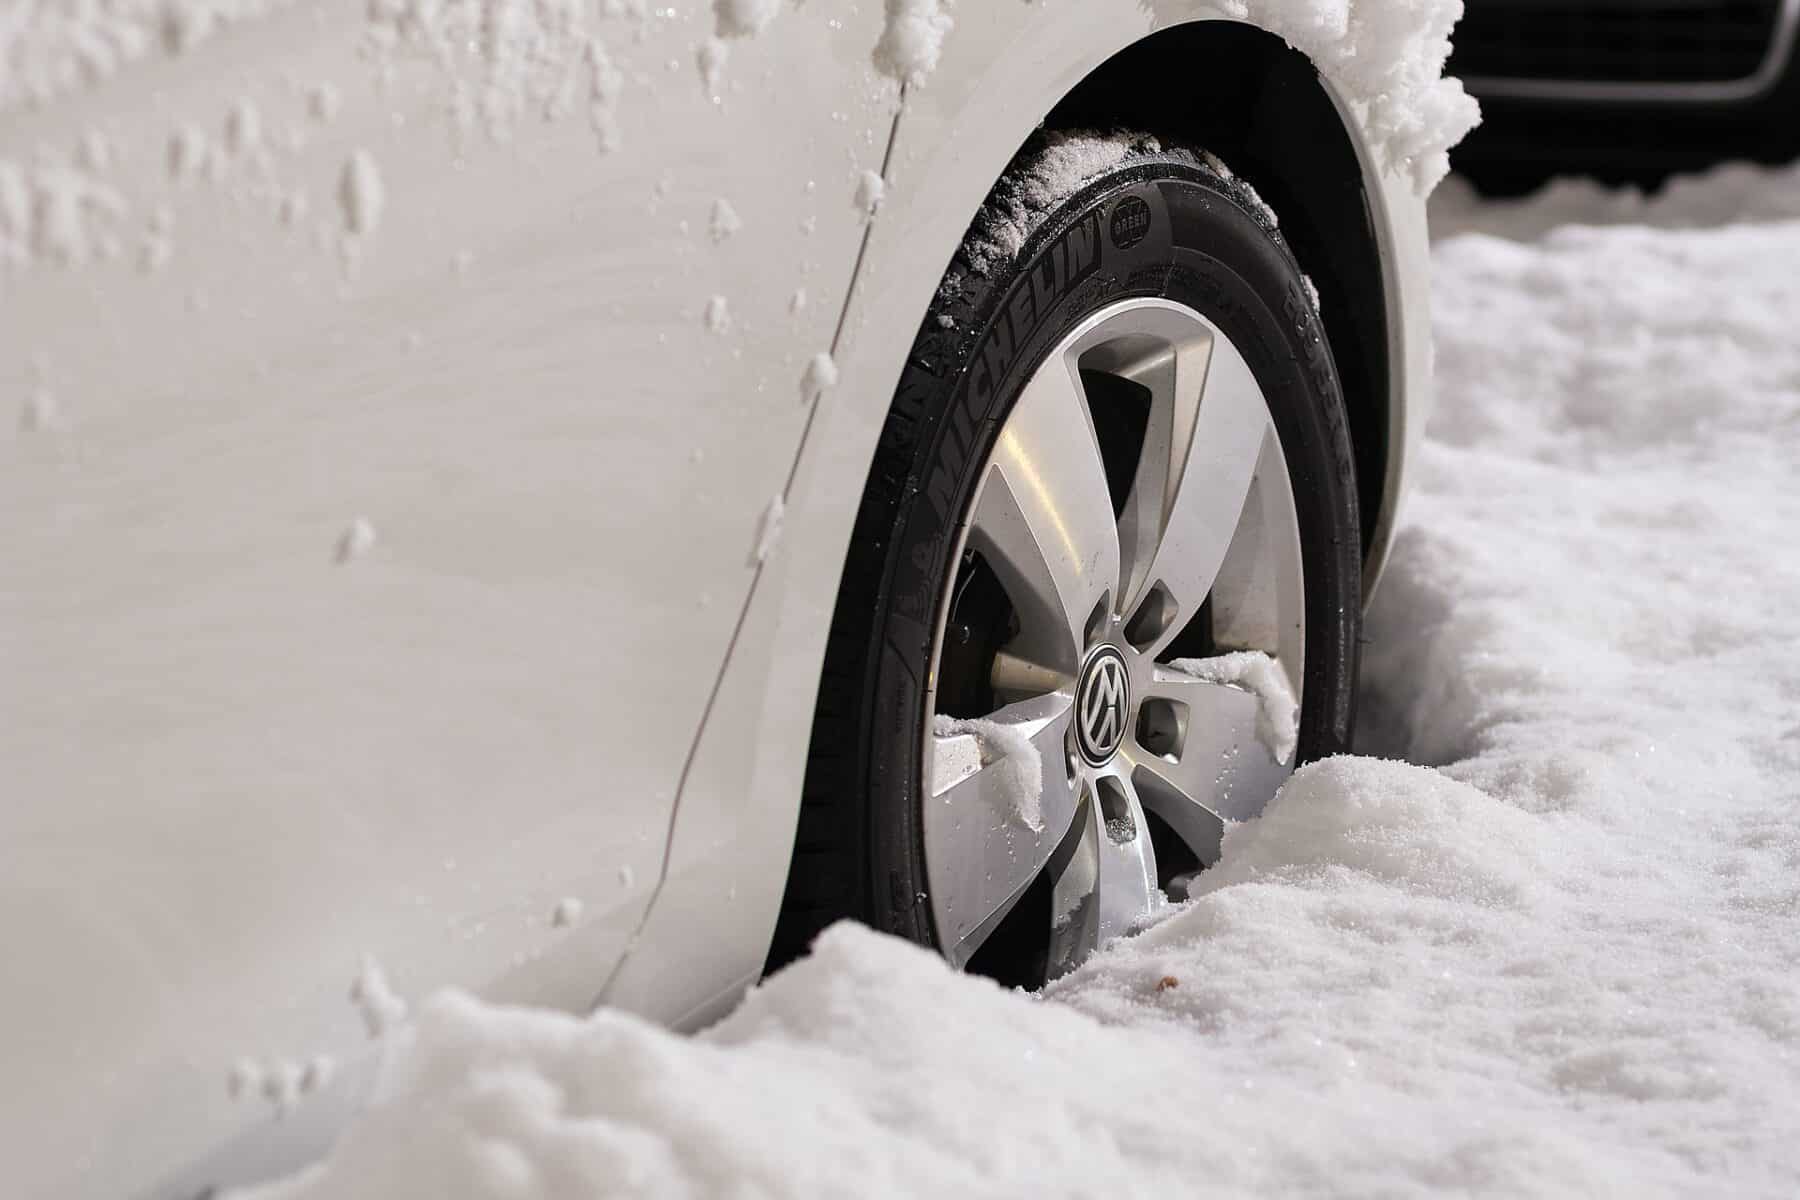 Maintenance tips for the car in winter